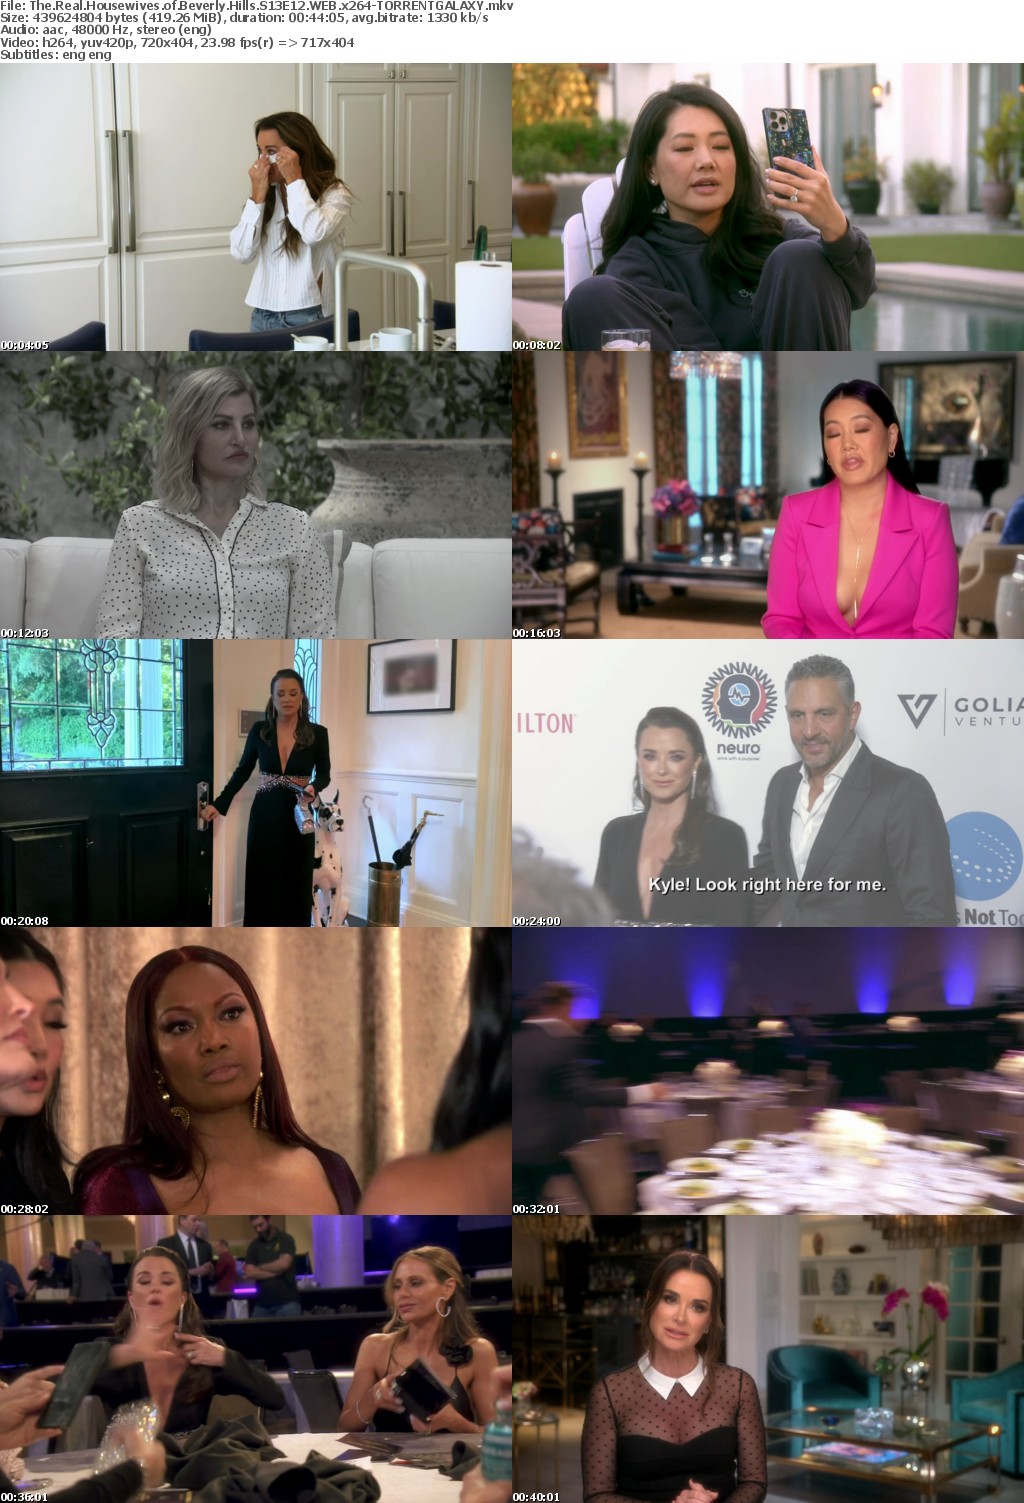 The Real Housewives of Beverly Hills S13E12 WEB x264-GALAXY